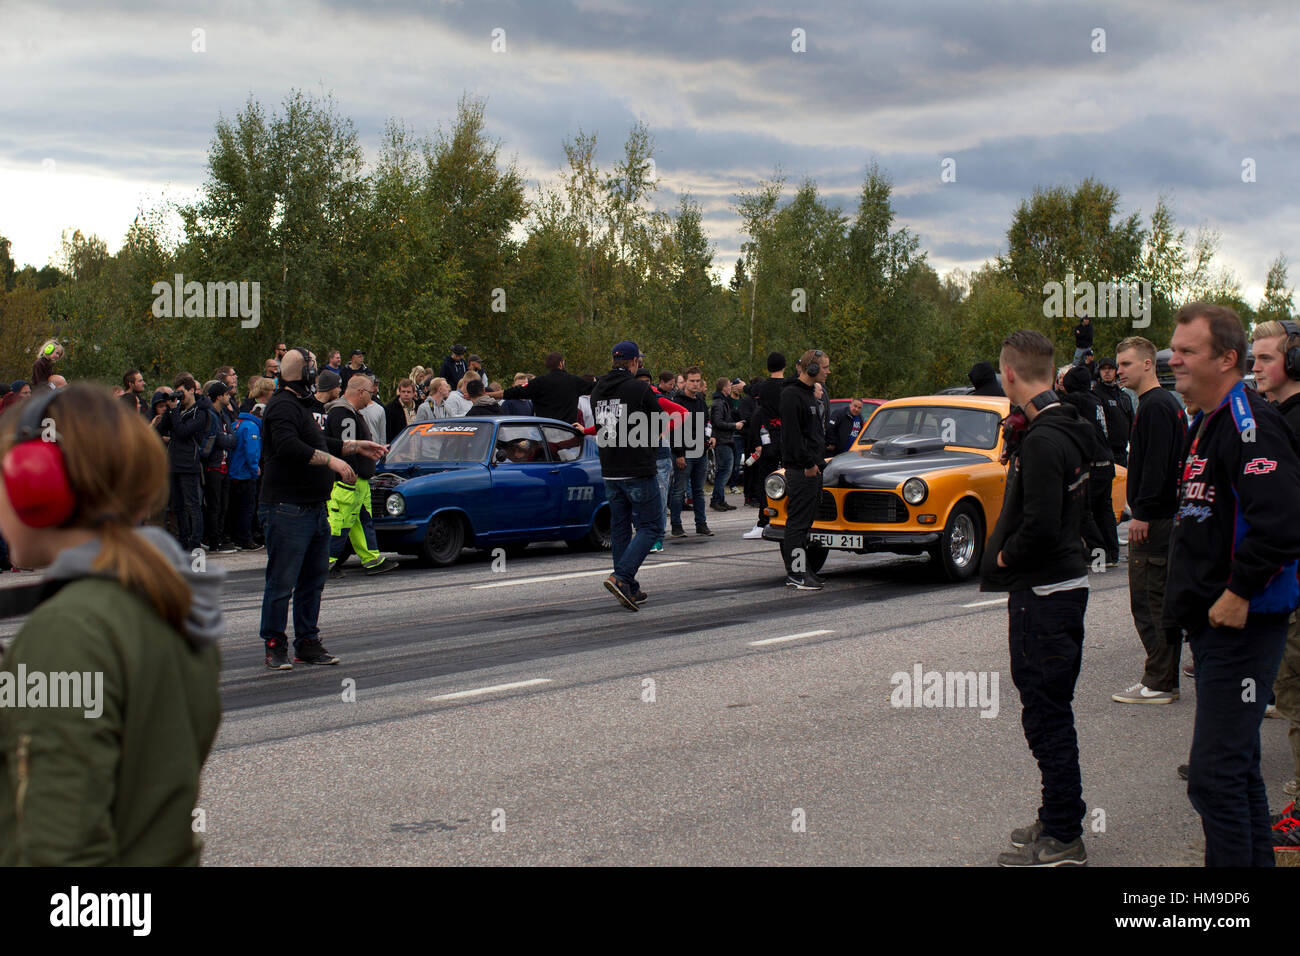 Illegal street racing at a secret location in Sweden Stock Photo